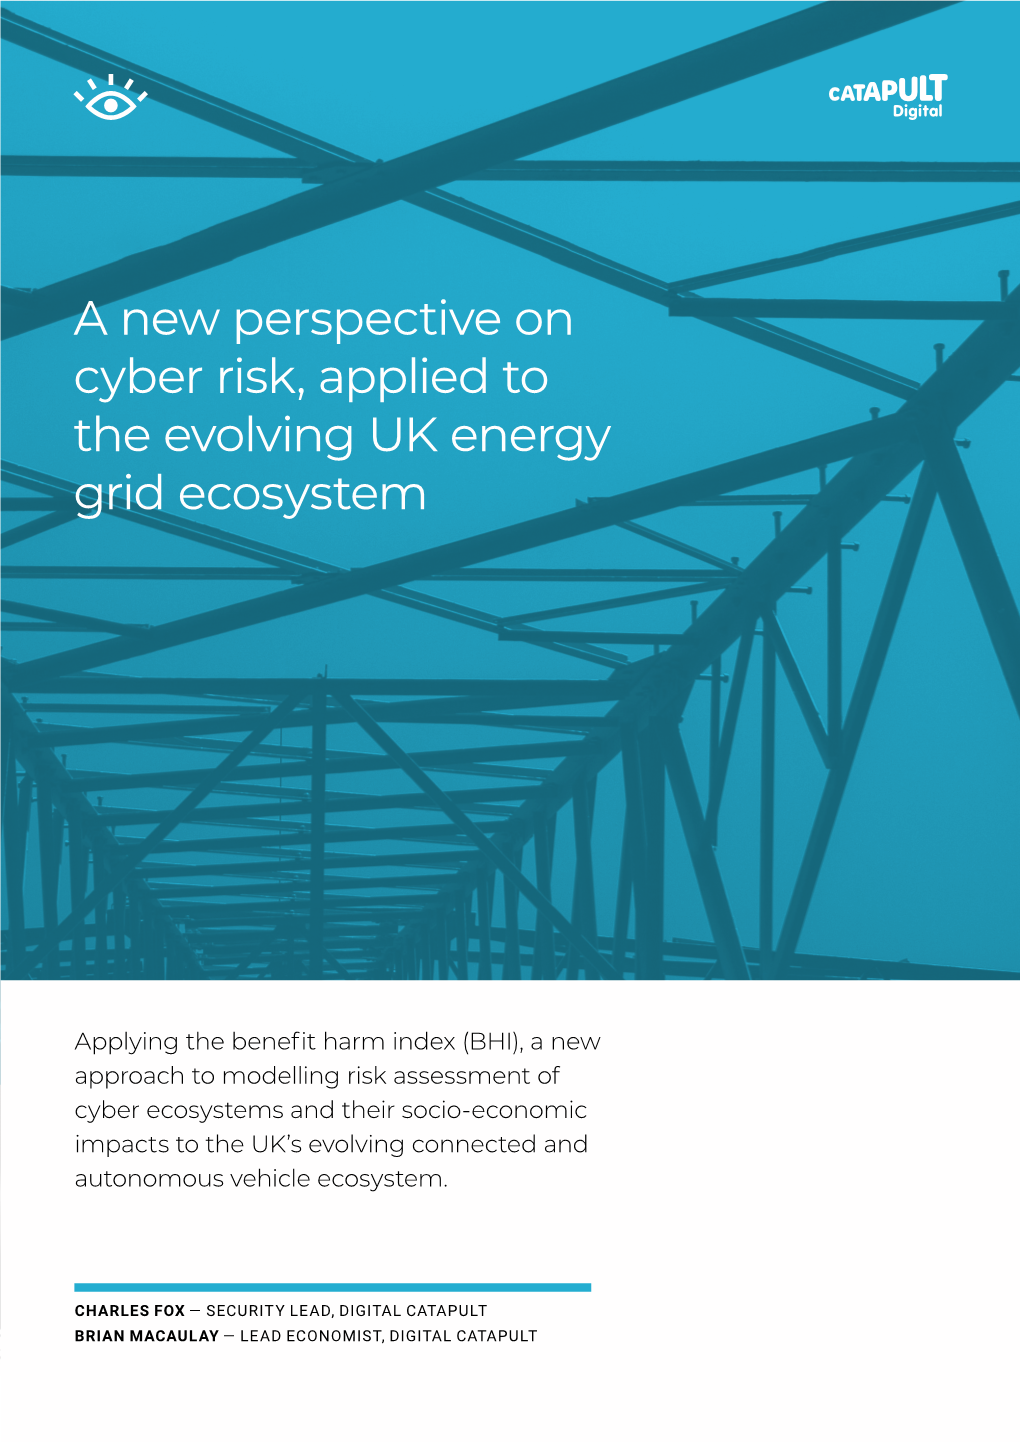 A New Perspective on Cyber Risk, Applied to the Evolving UK Energy Grid Ecosystem